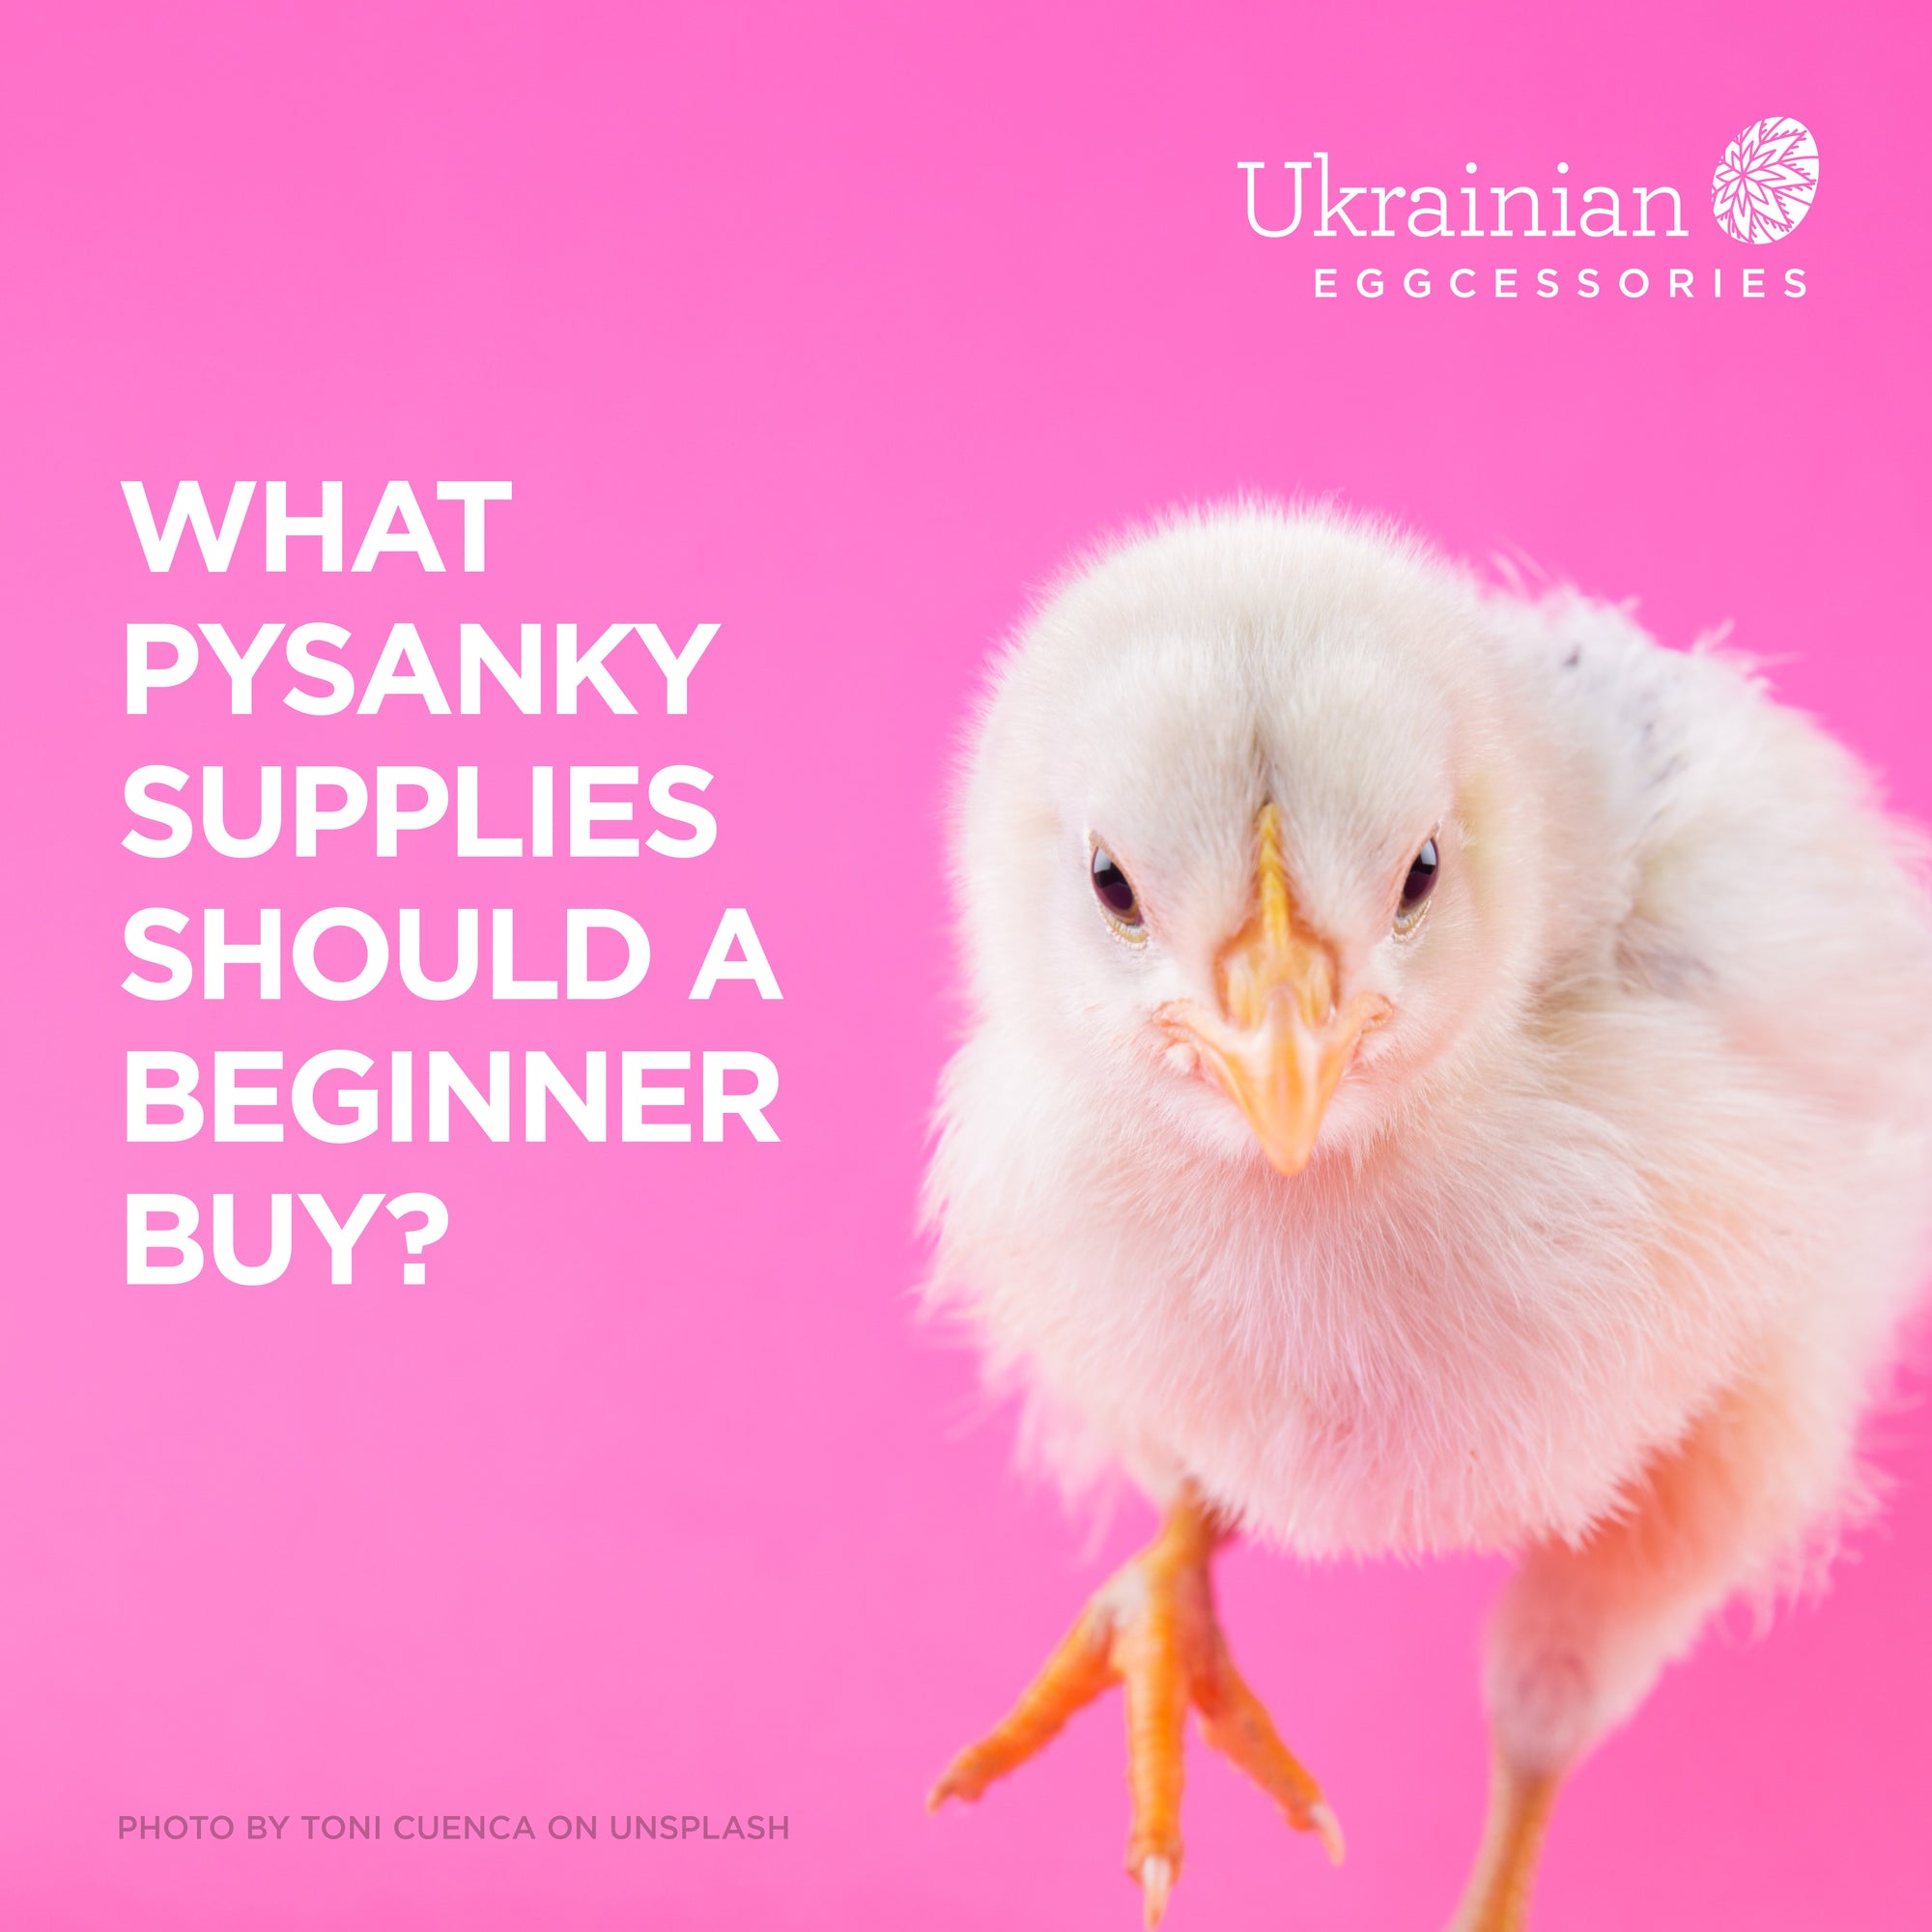 What Pysanky supplies should a beginner buy?